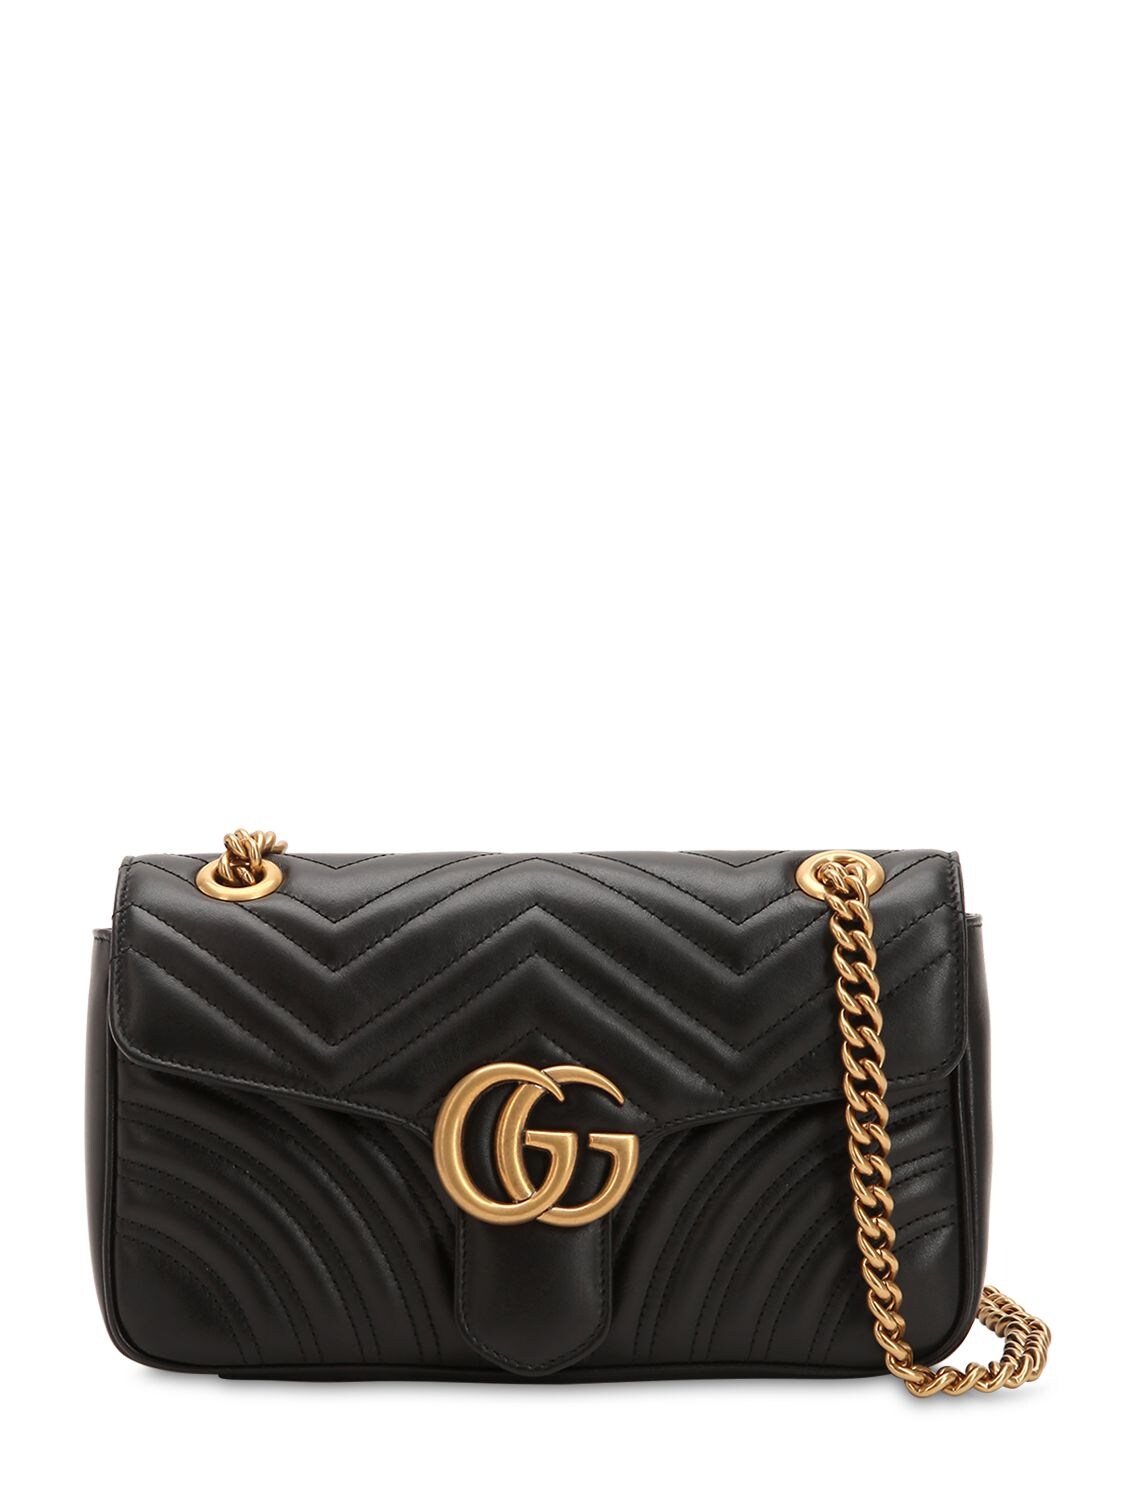 GUCCI SMALL GG MARMONT 2.0 LEATHER BAG,68IIJS017-MTAwMA2